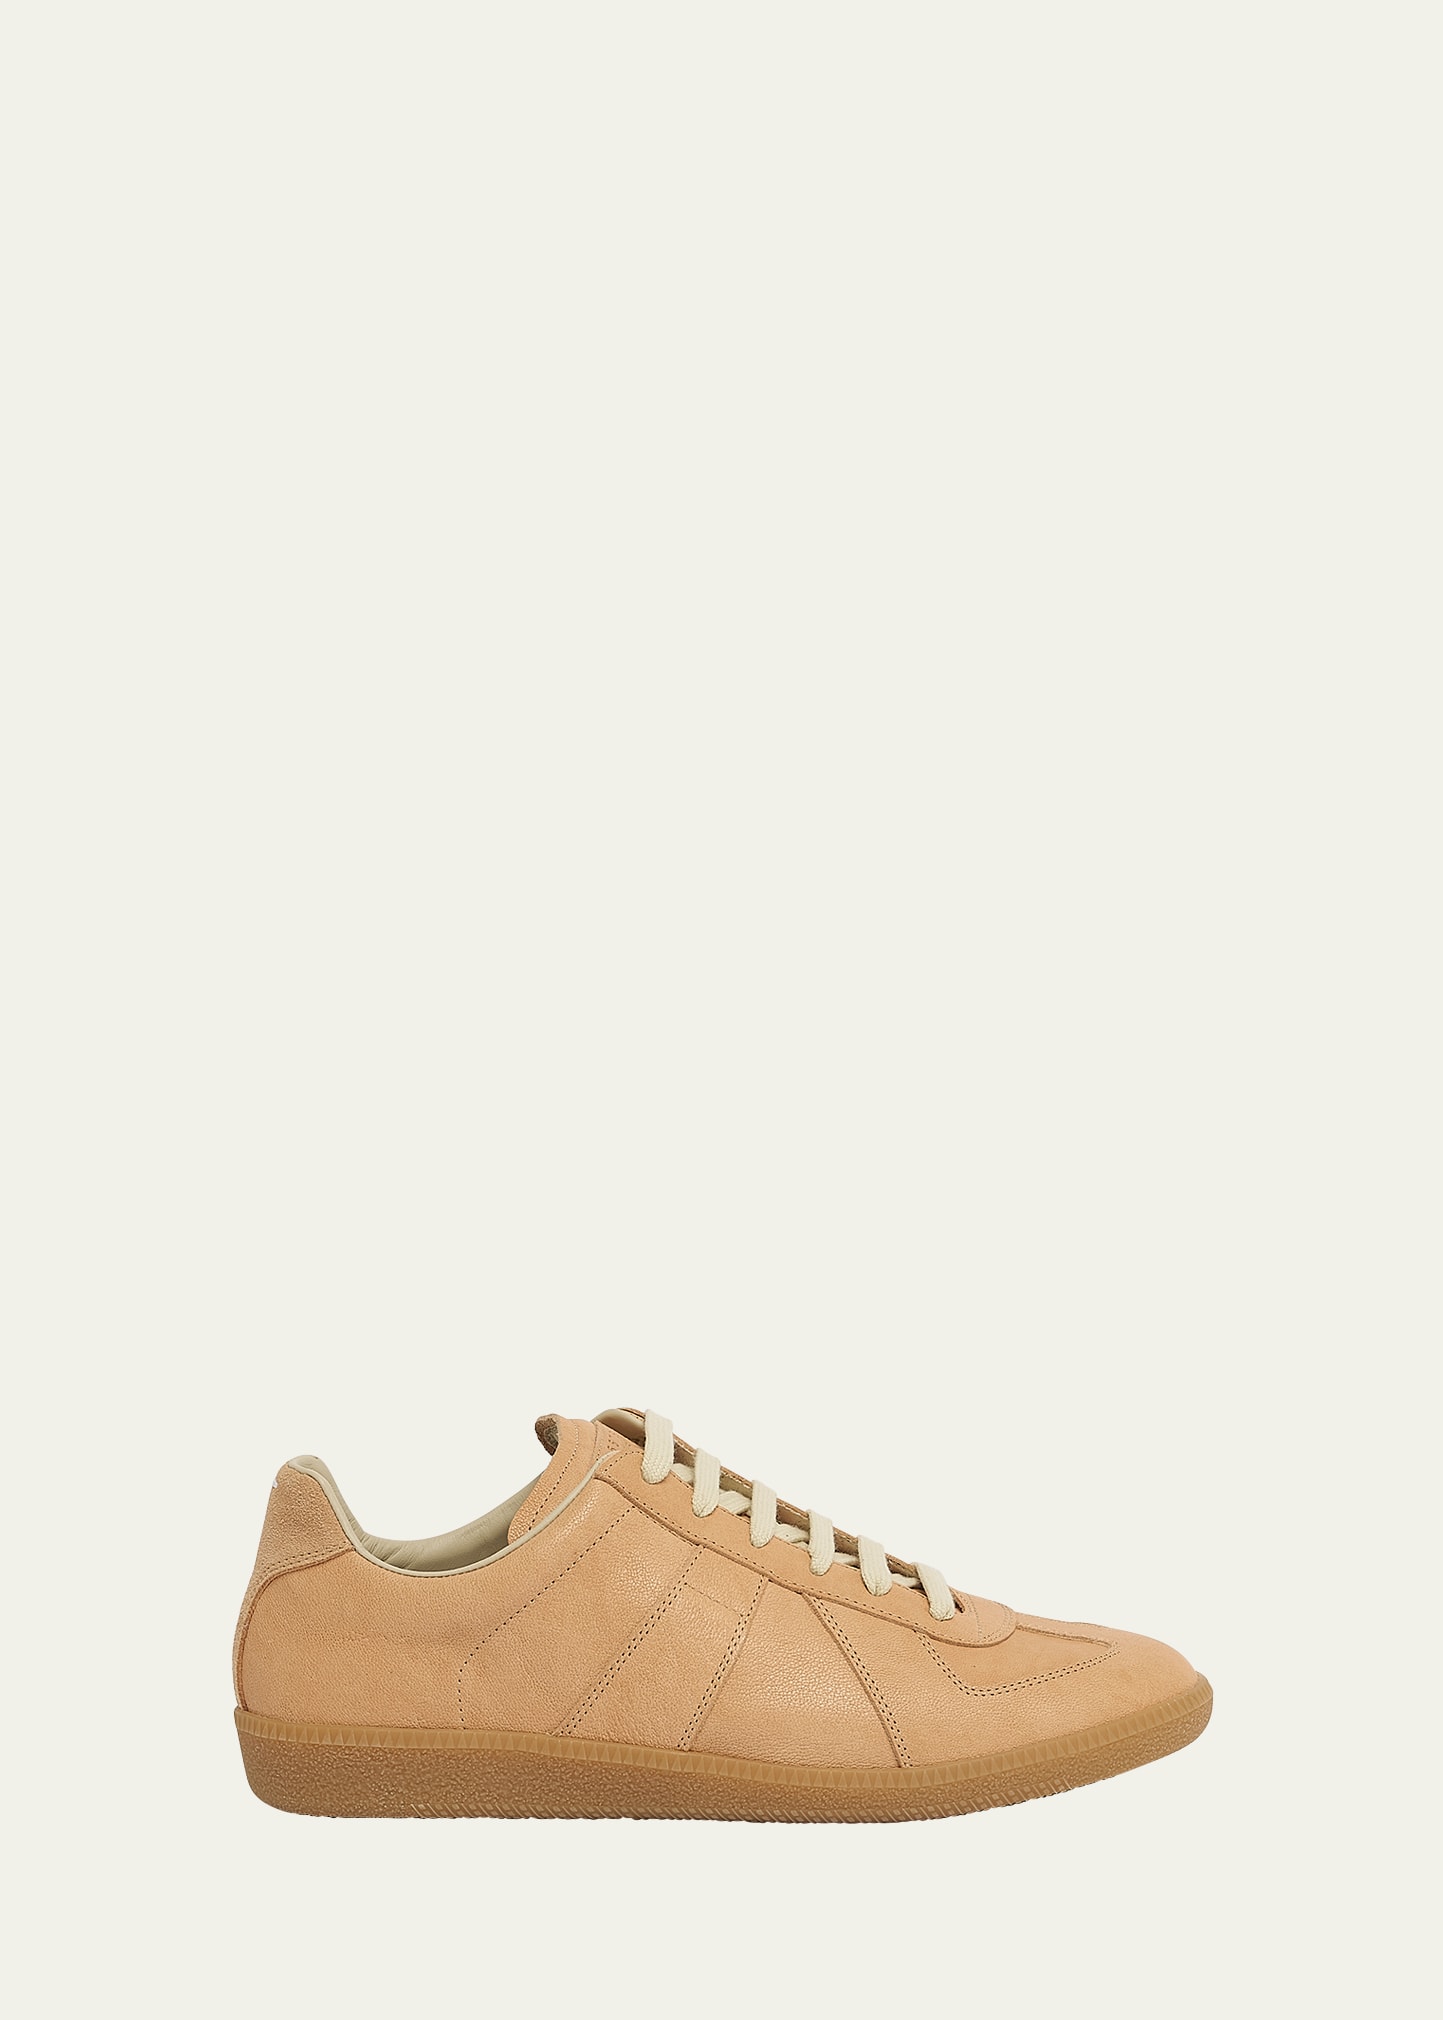 Maison Margiela Replica Mixed Leather Low-top Sneakers In Camel